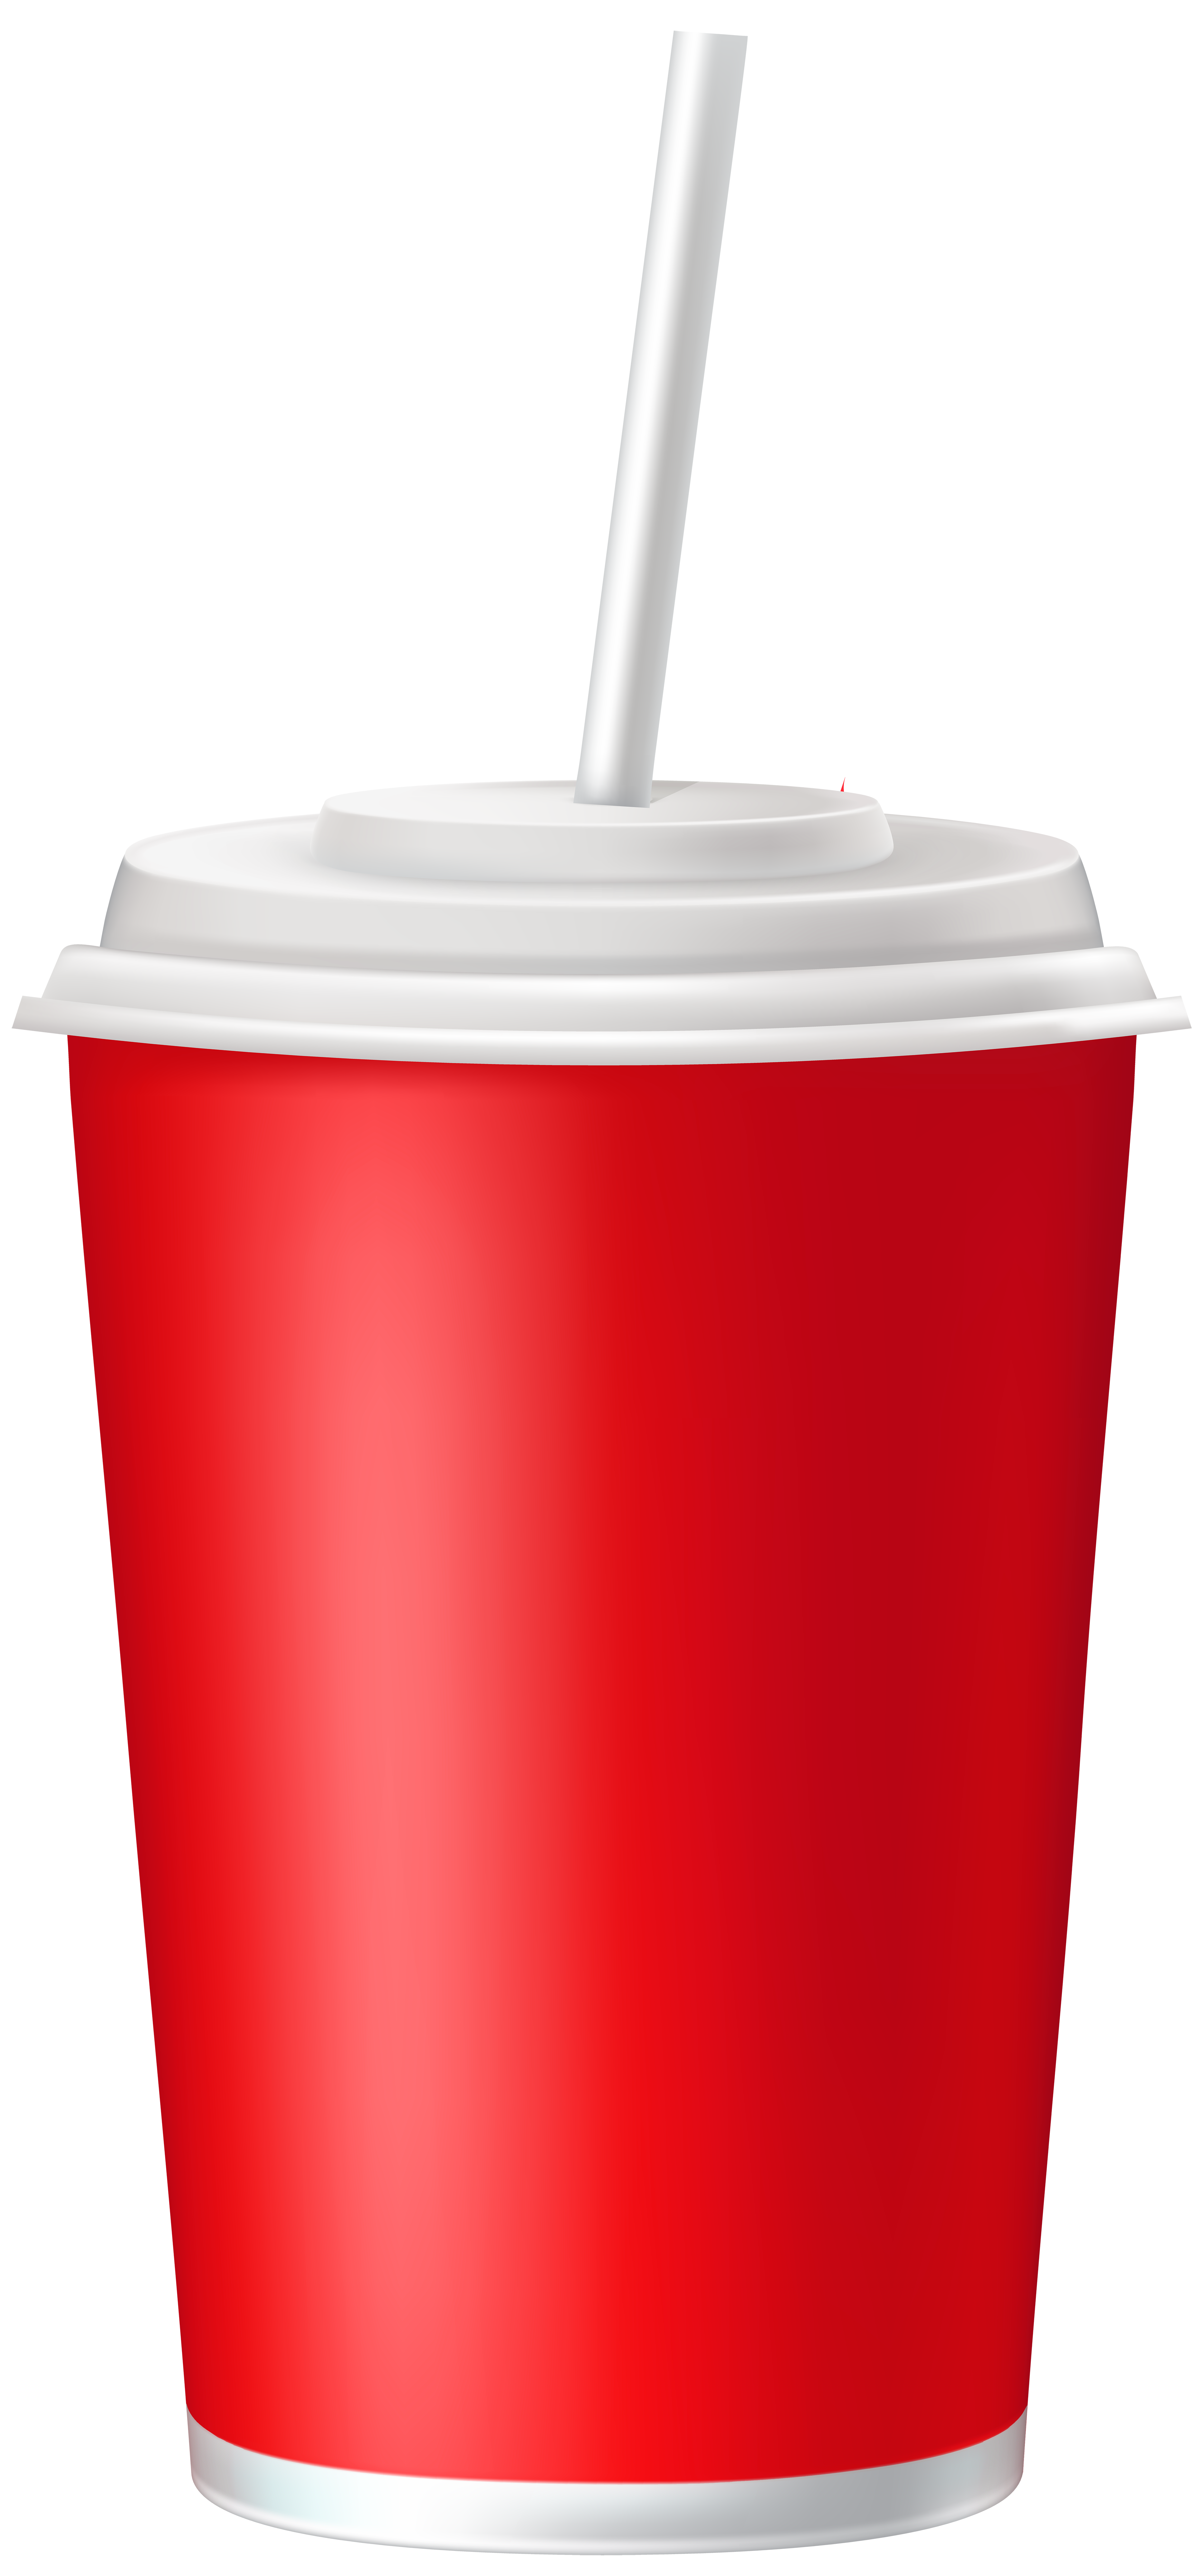 Plastic Cup Png - Free Logo Image